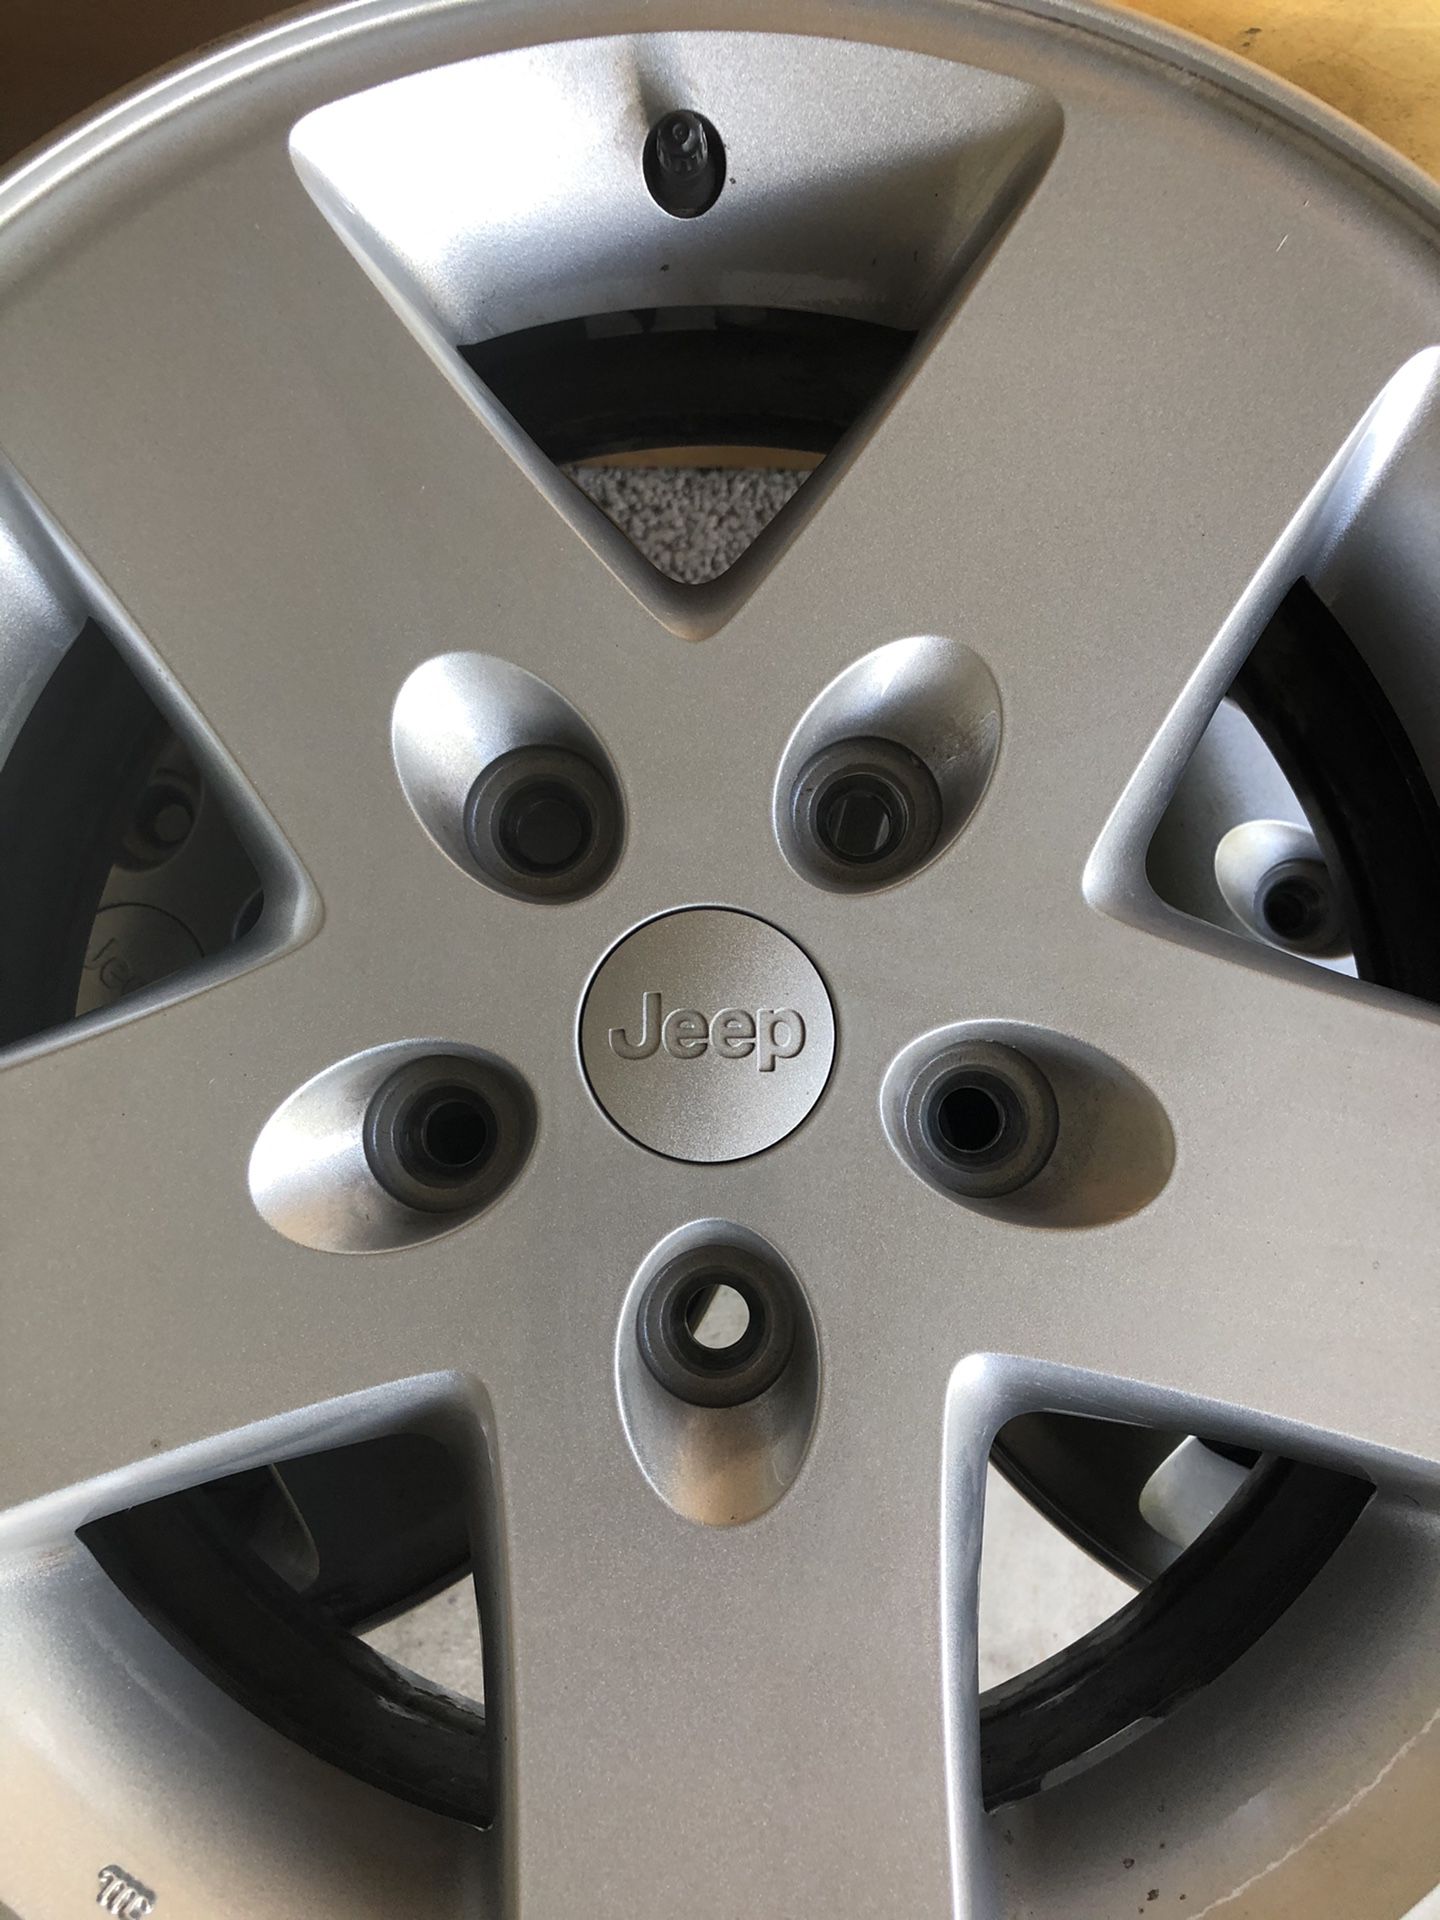 5 Jeep 17” wheels in mint condition ($50 total all 5)